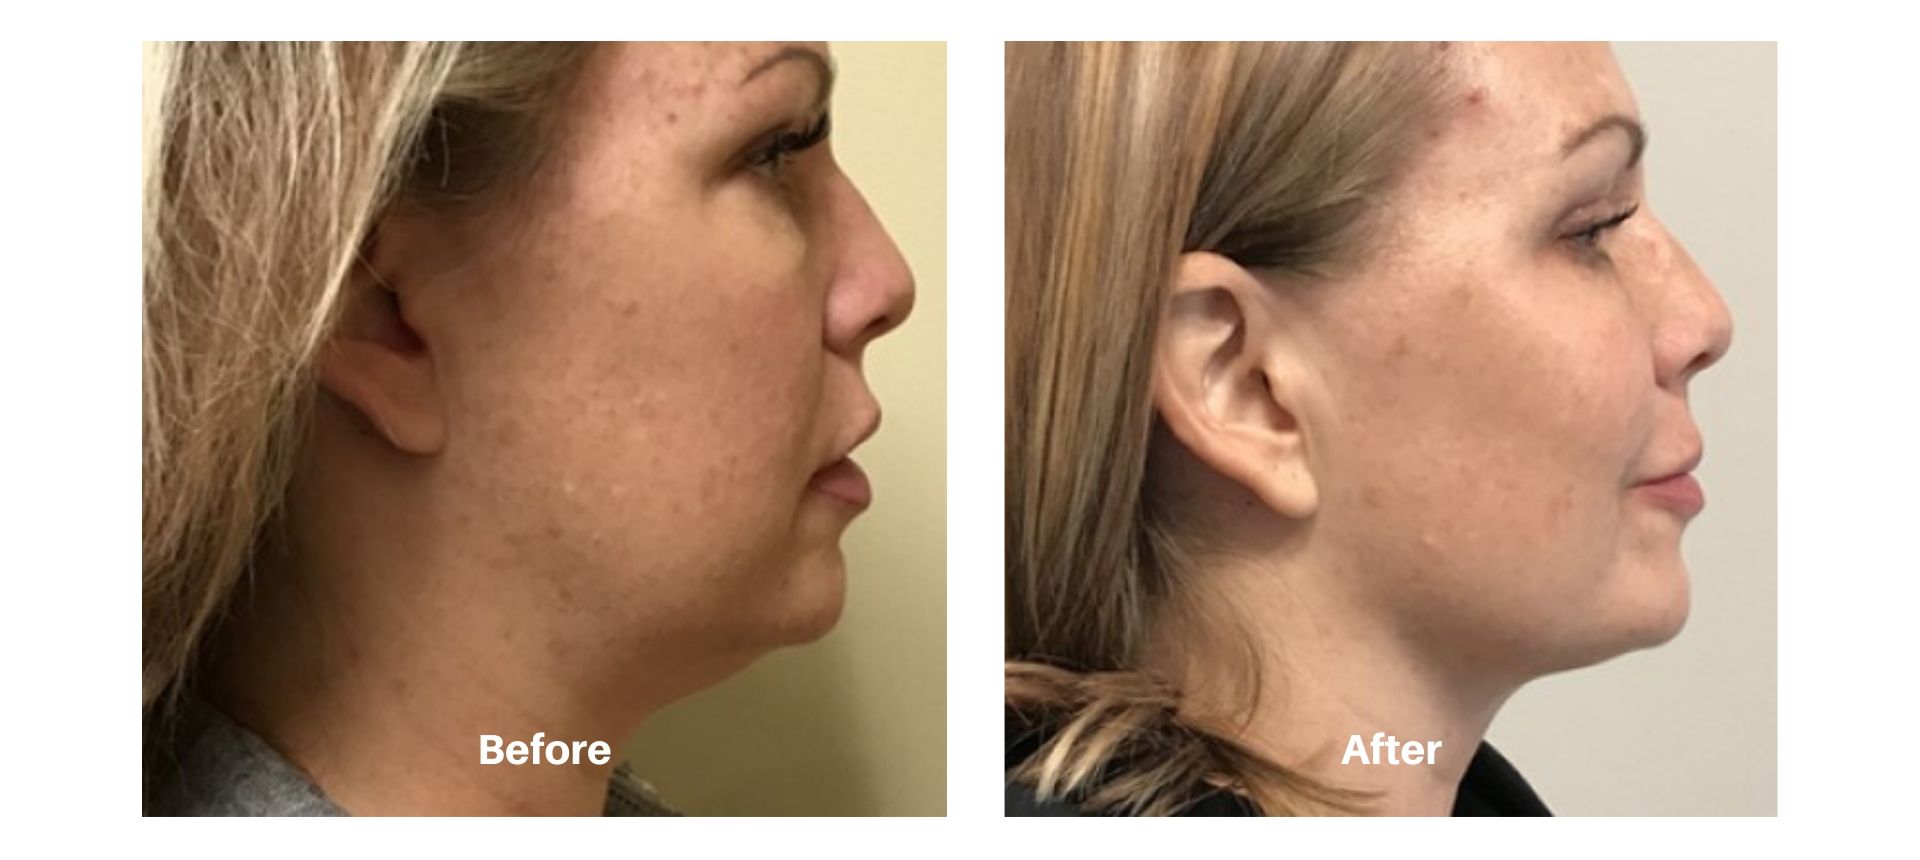 Woman's before and after images from kybella treatment at Always Beautiful.